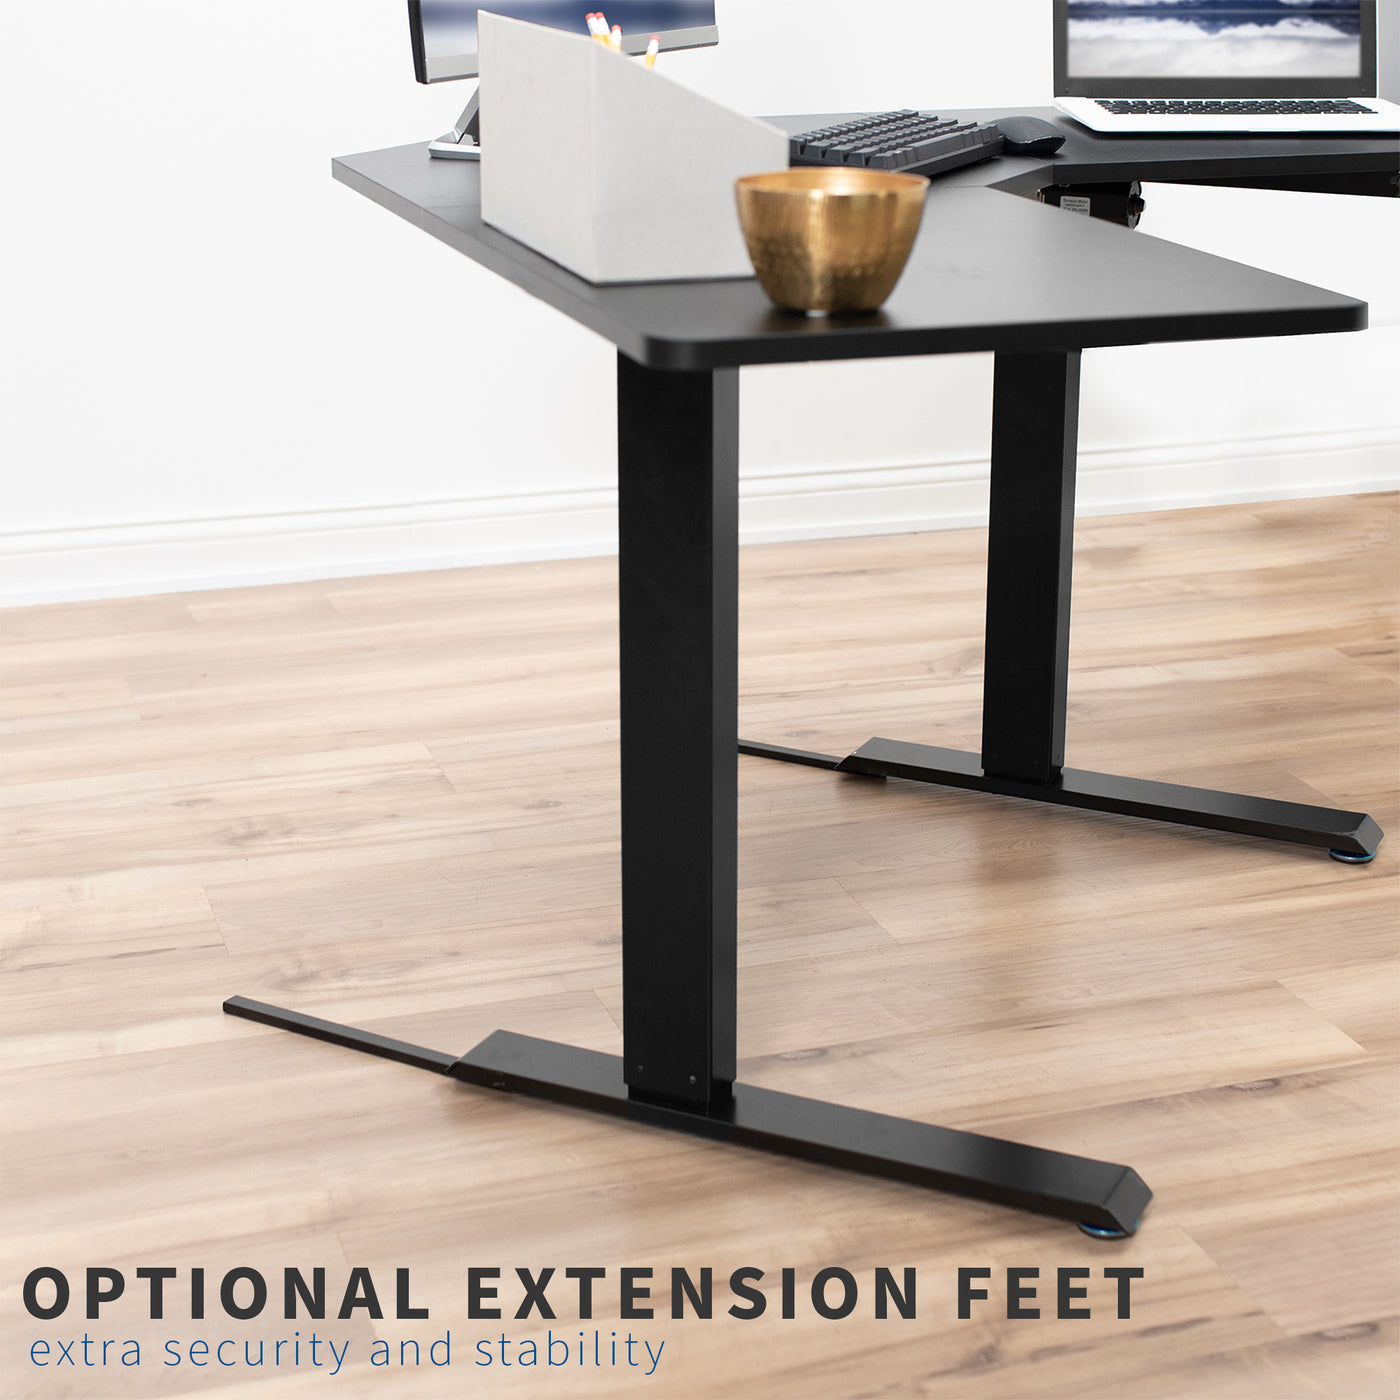 Extra security and stability are provided with optional extendable feet.